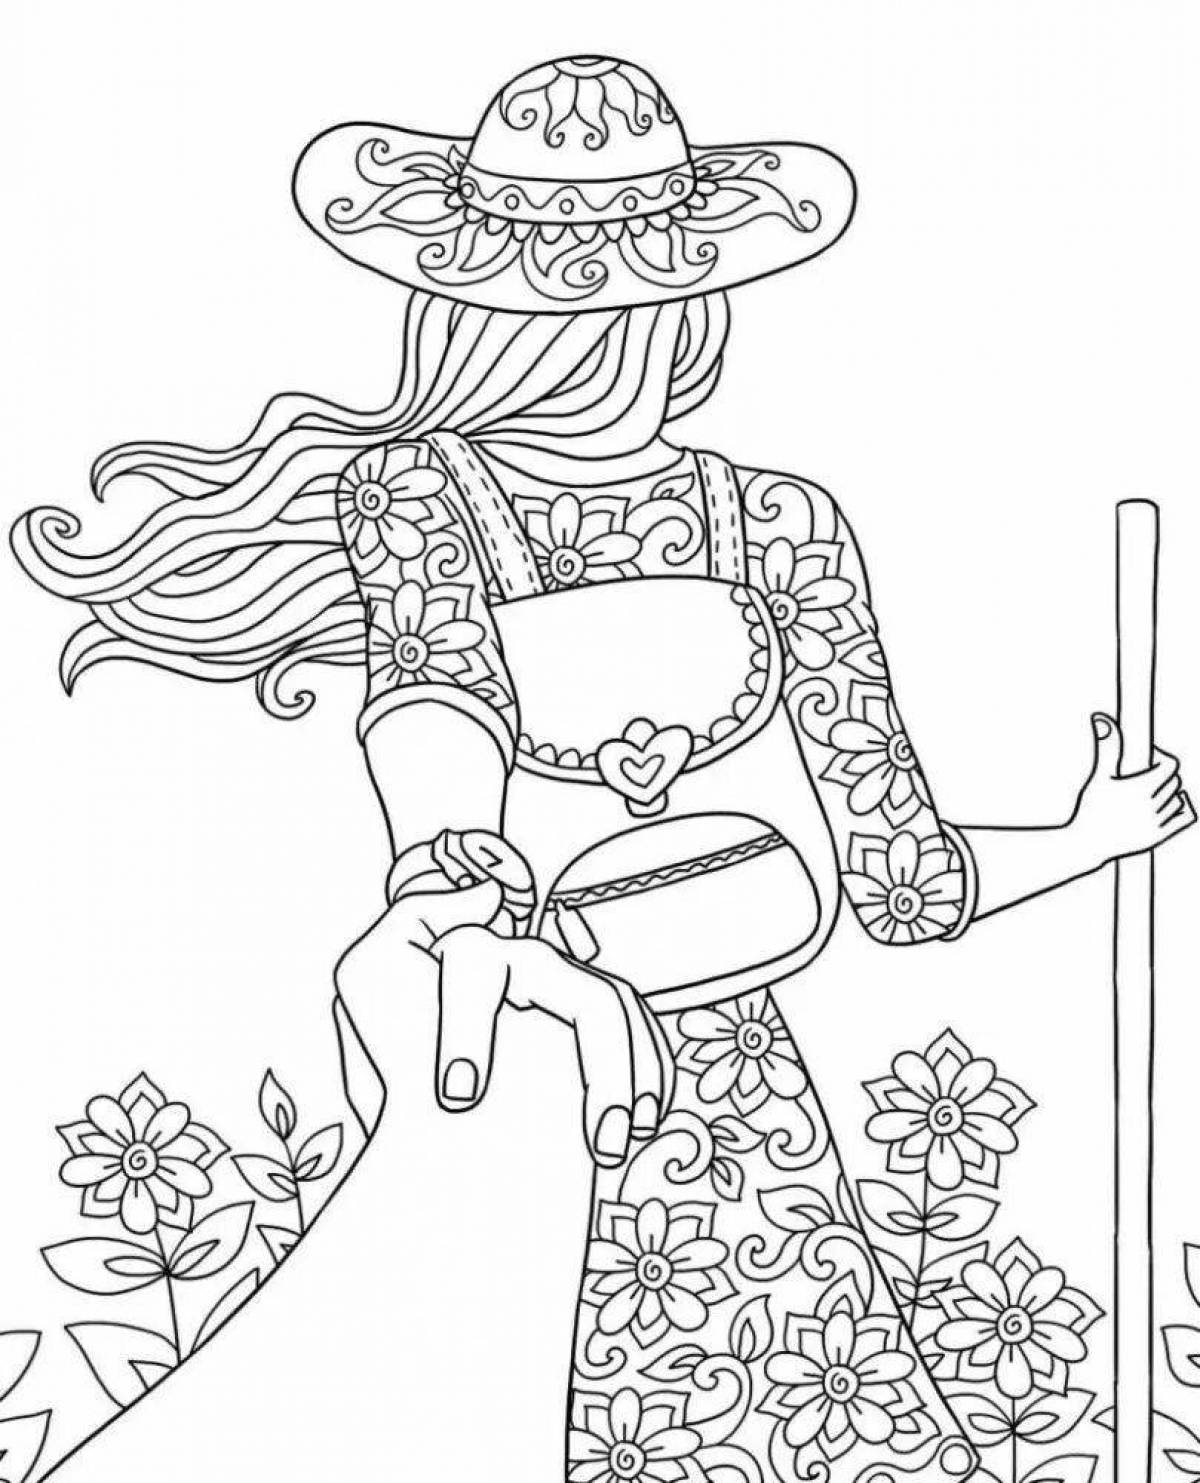 Silly fashionista coloring book